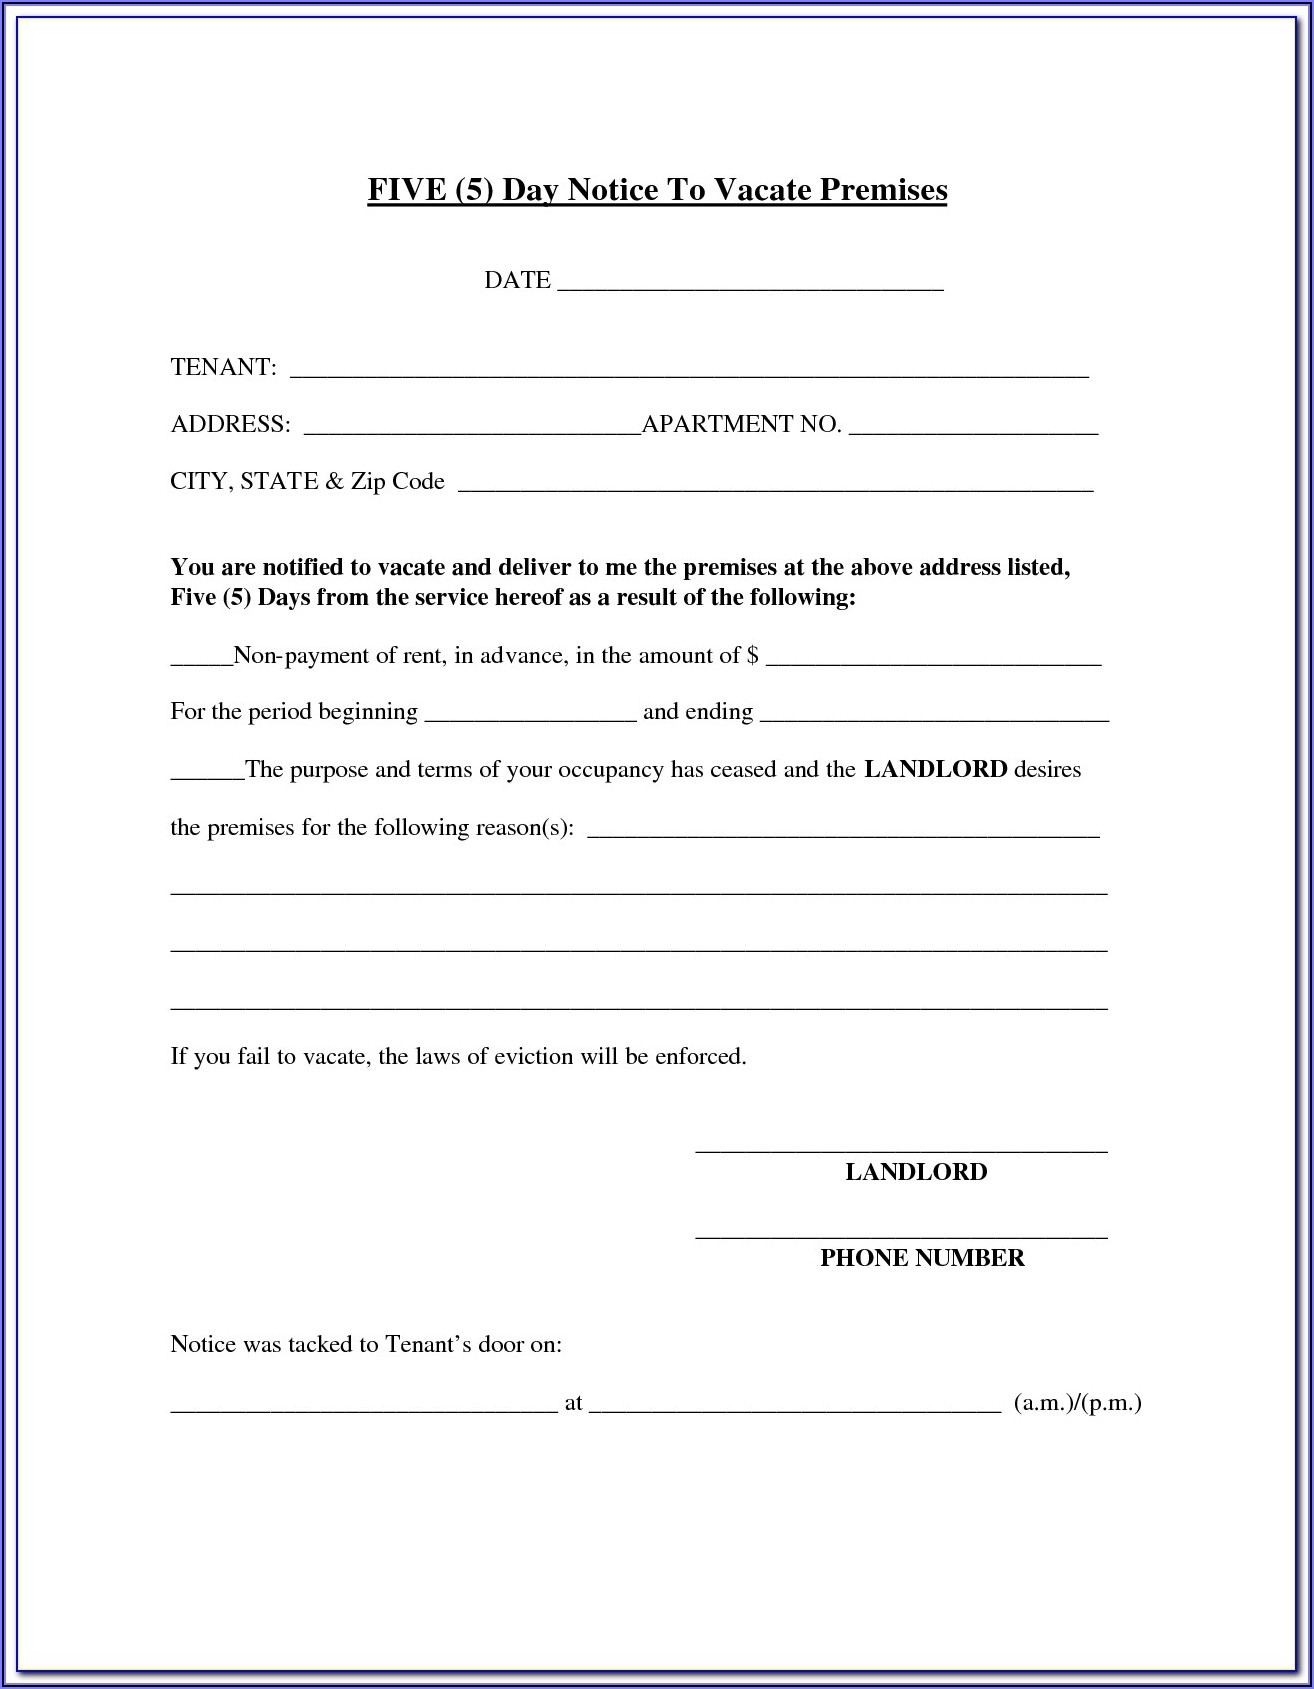 Chicago 5 Day Eviction Notice Form